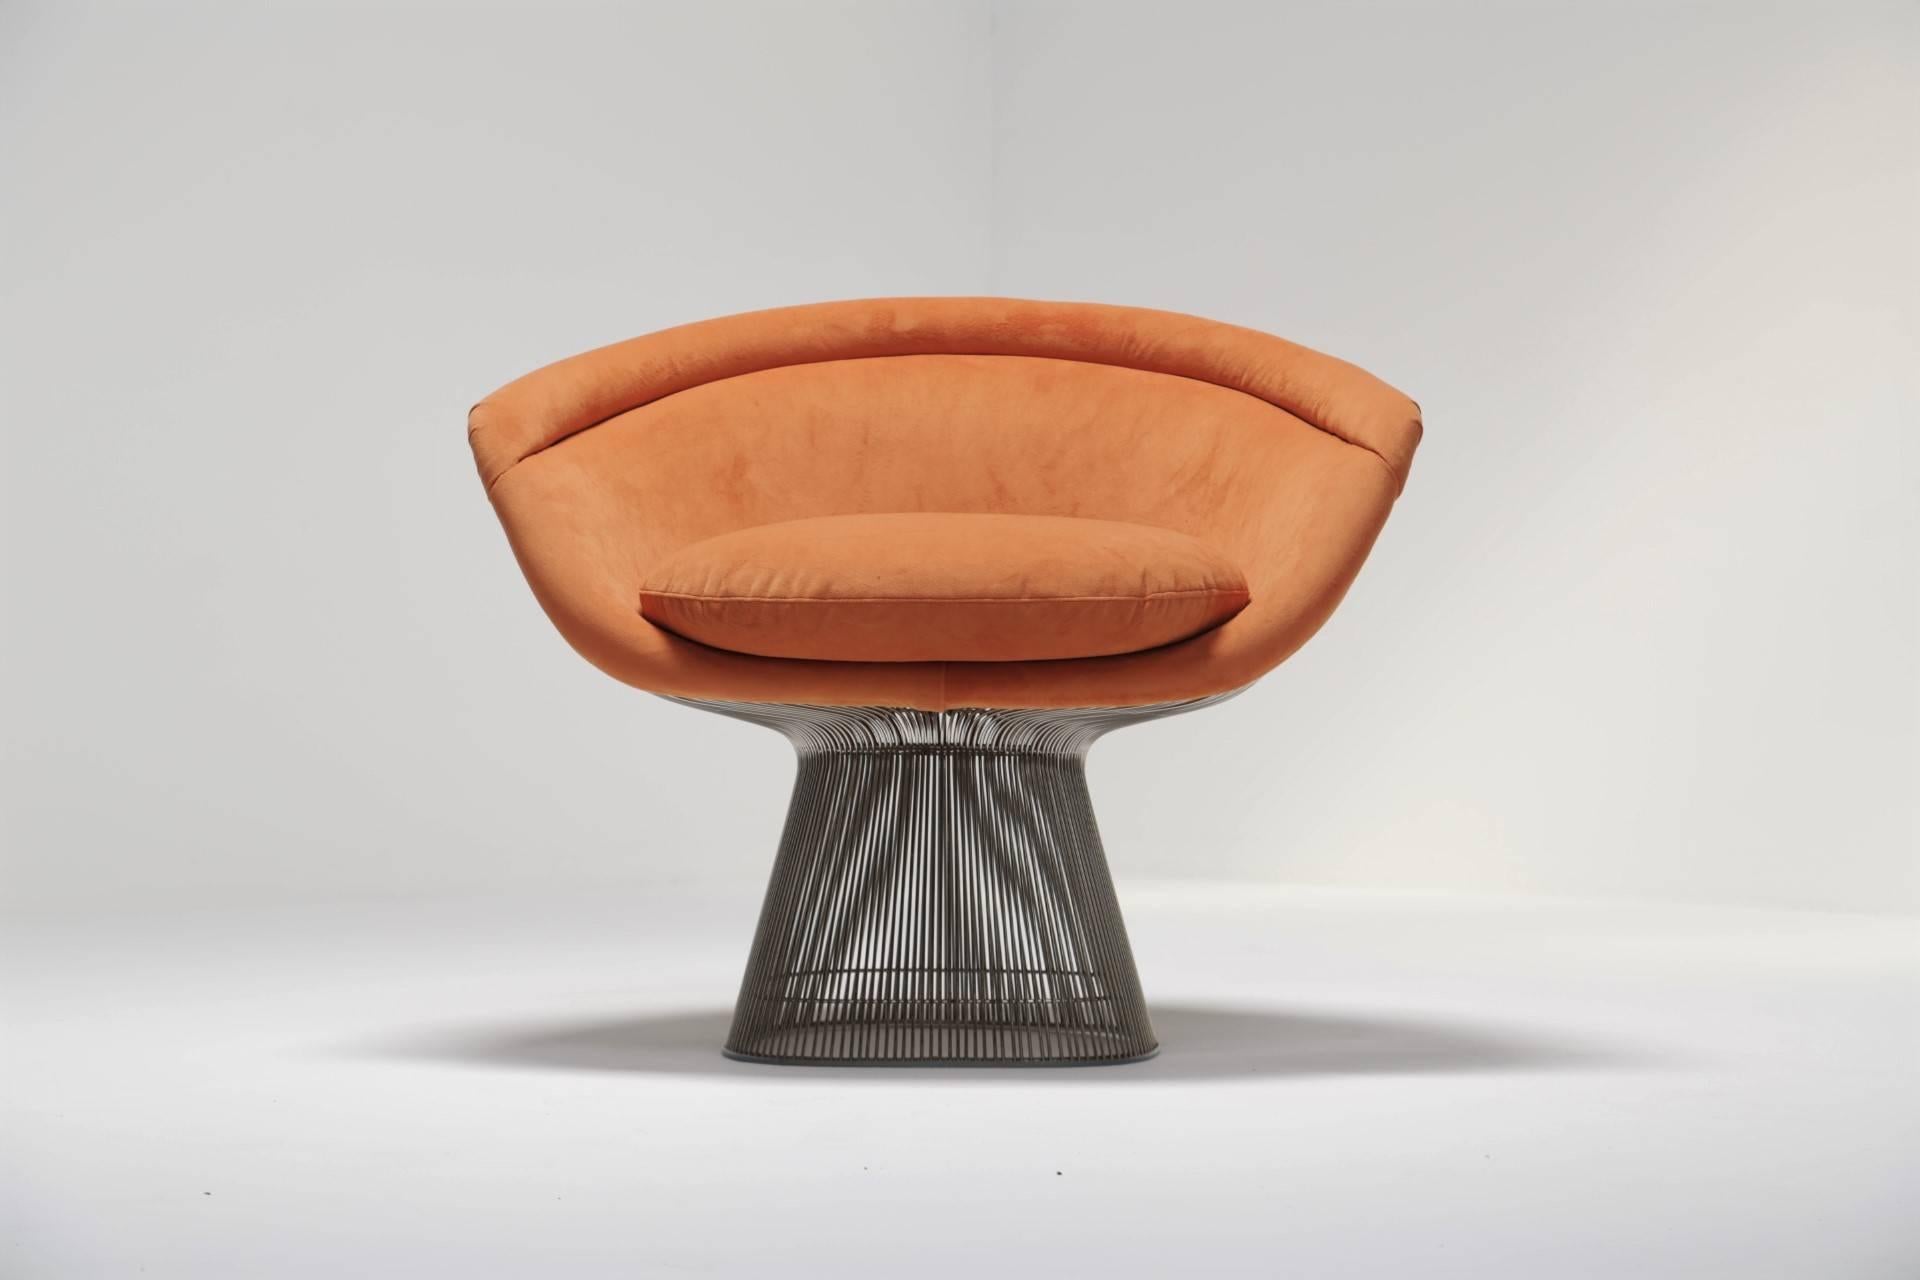 This Warren Platner lounge chair is without doubt an icon of modernist design. American Architect and Designer Warren Platner designed this chair in 1966. It was part of his collaboration with Knoll International on the 'Platner Collection'. They